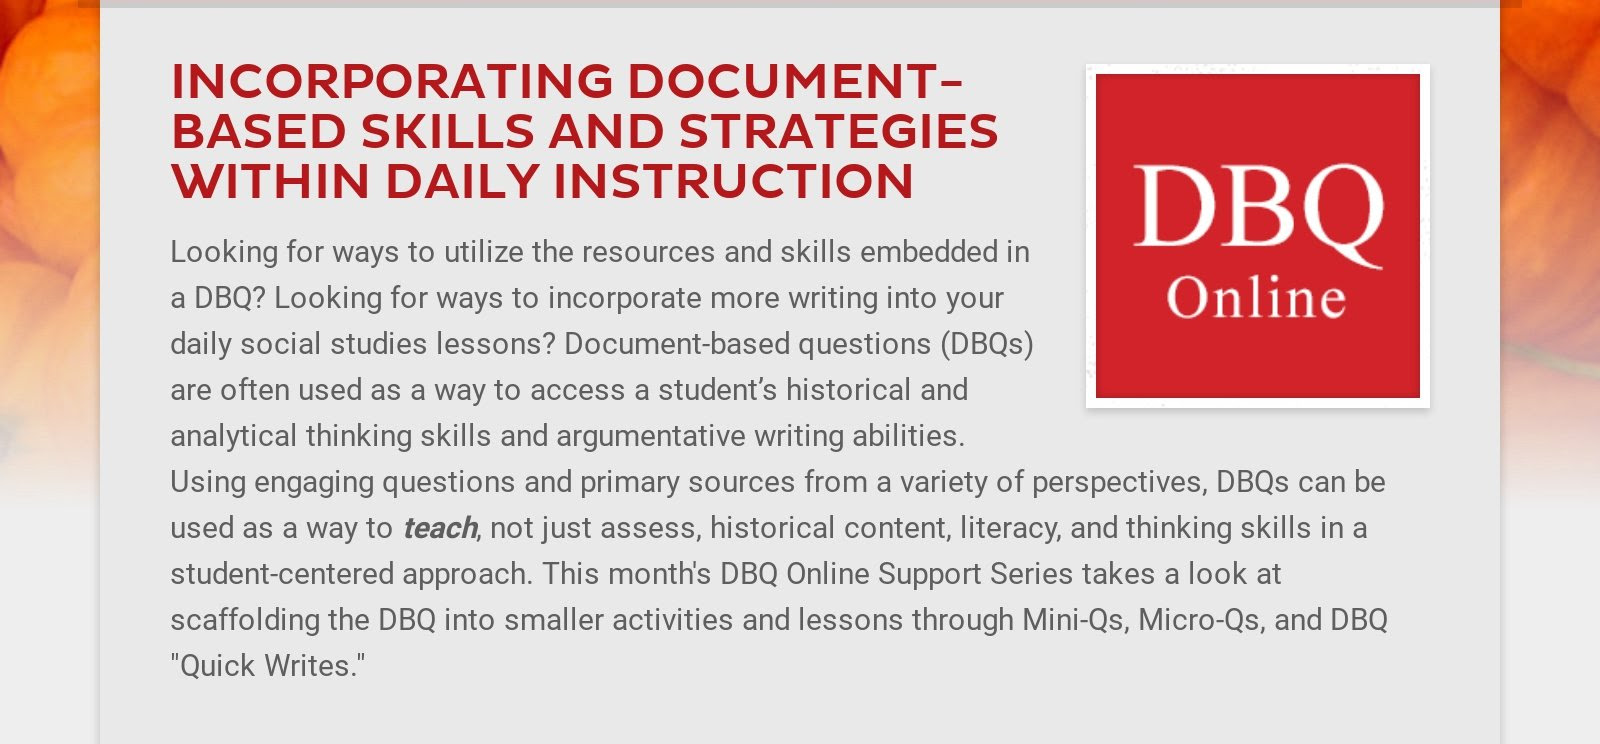 INCORPORATING DOCUMENT-BASED SKILLS AND STRATEGIES WITHIN DAILY INSTRUCTION  Looking for ways to...